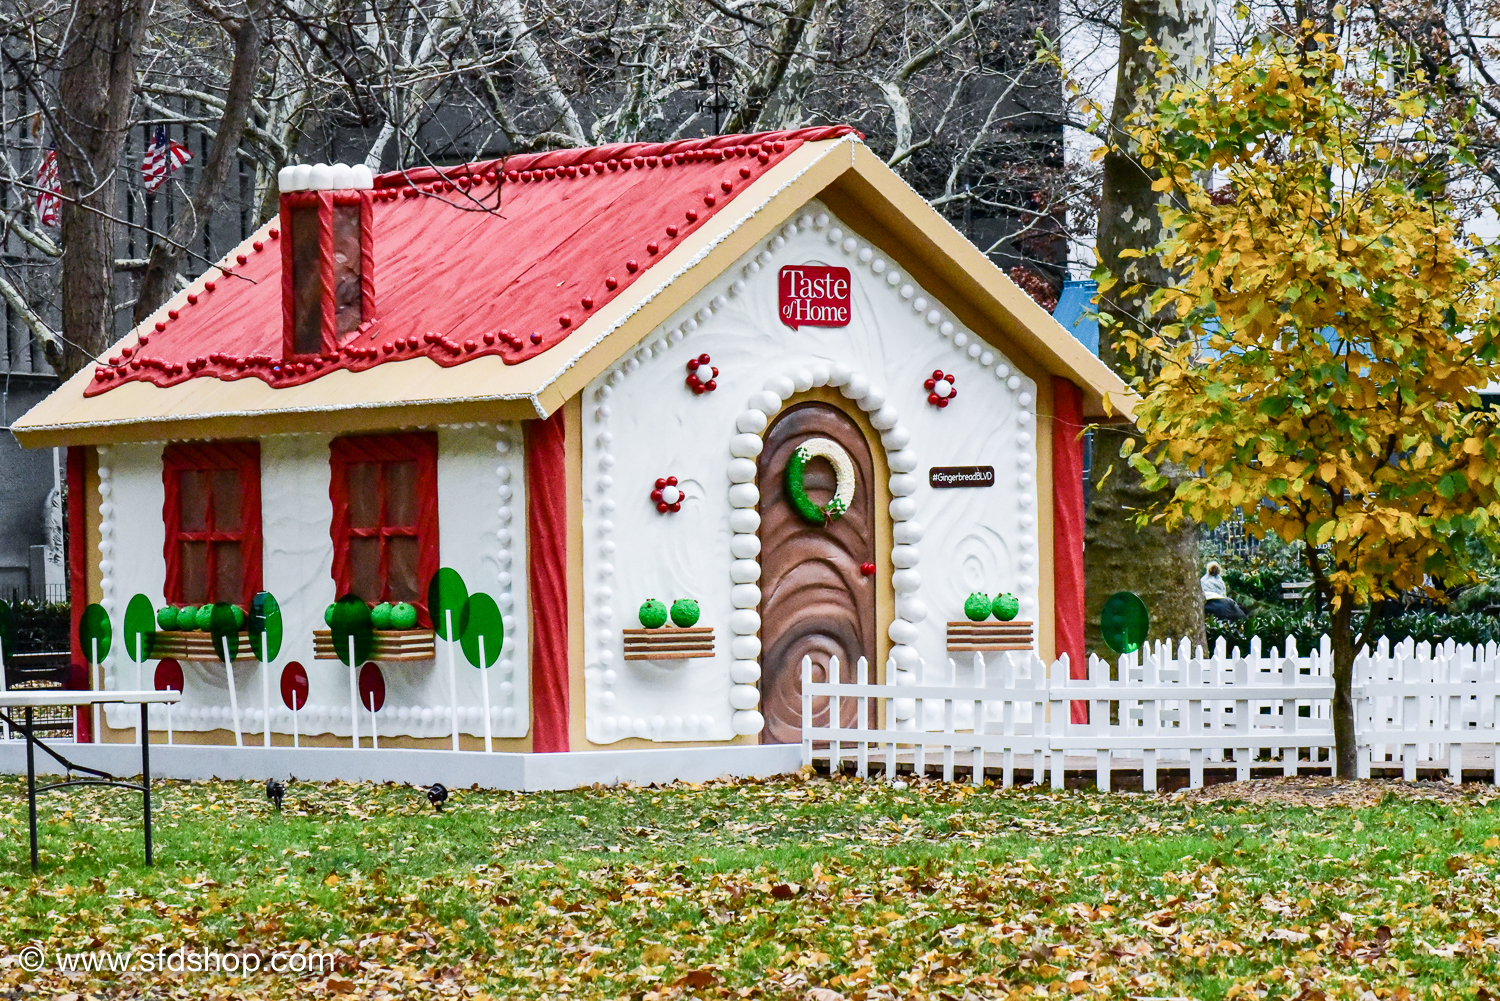 Taste of Home Gingerbread Blvd 2017 fabricated by SFDS-13.jpg